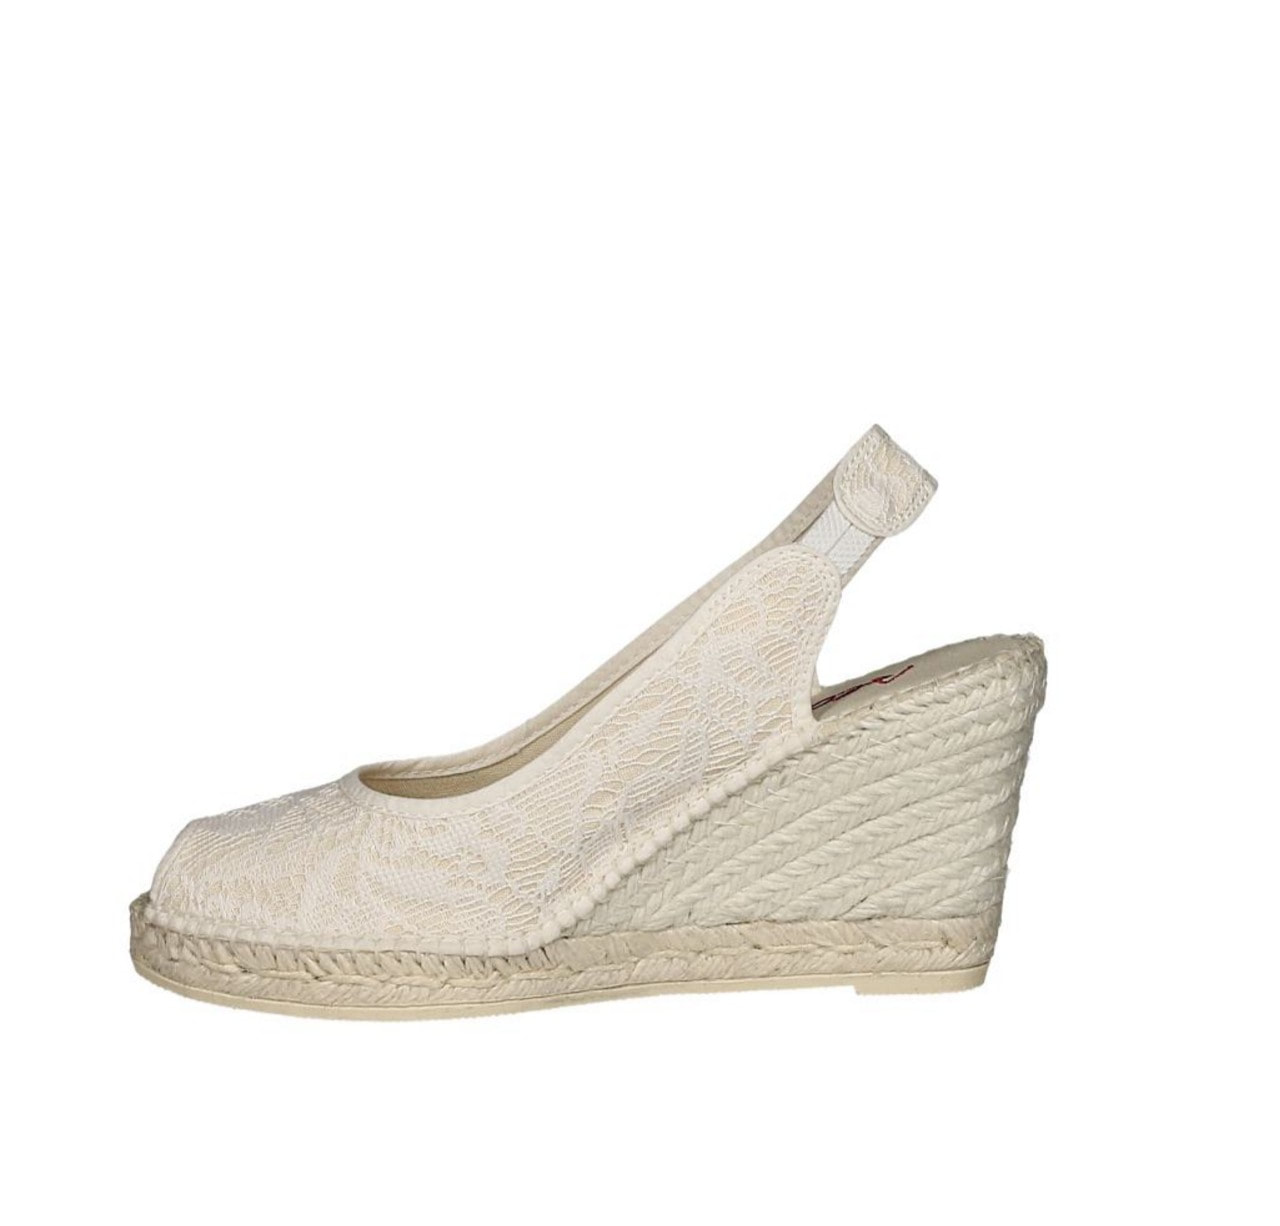 AEDO Natural Lace High Wedge